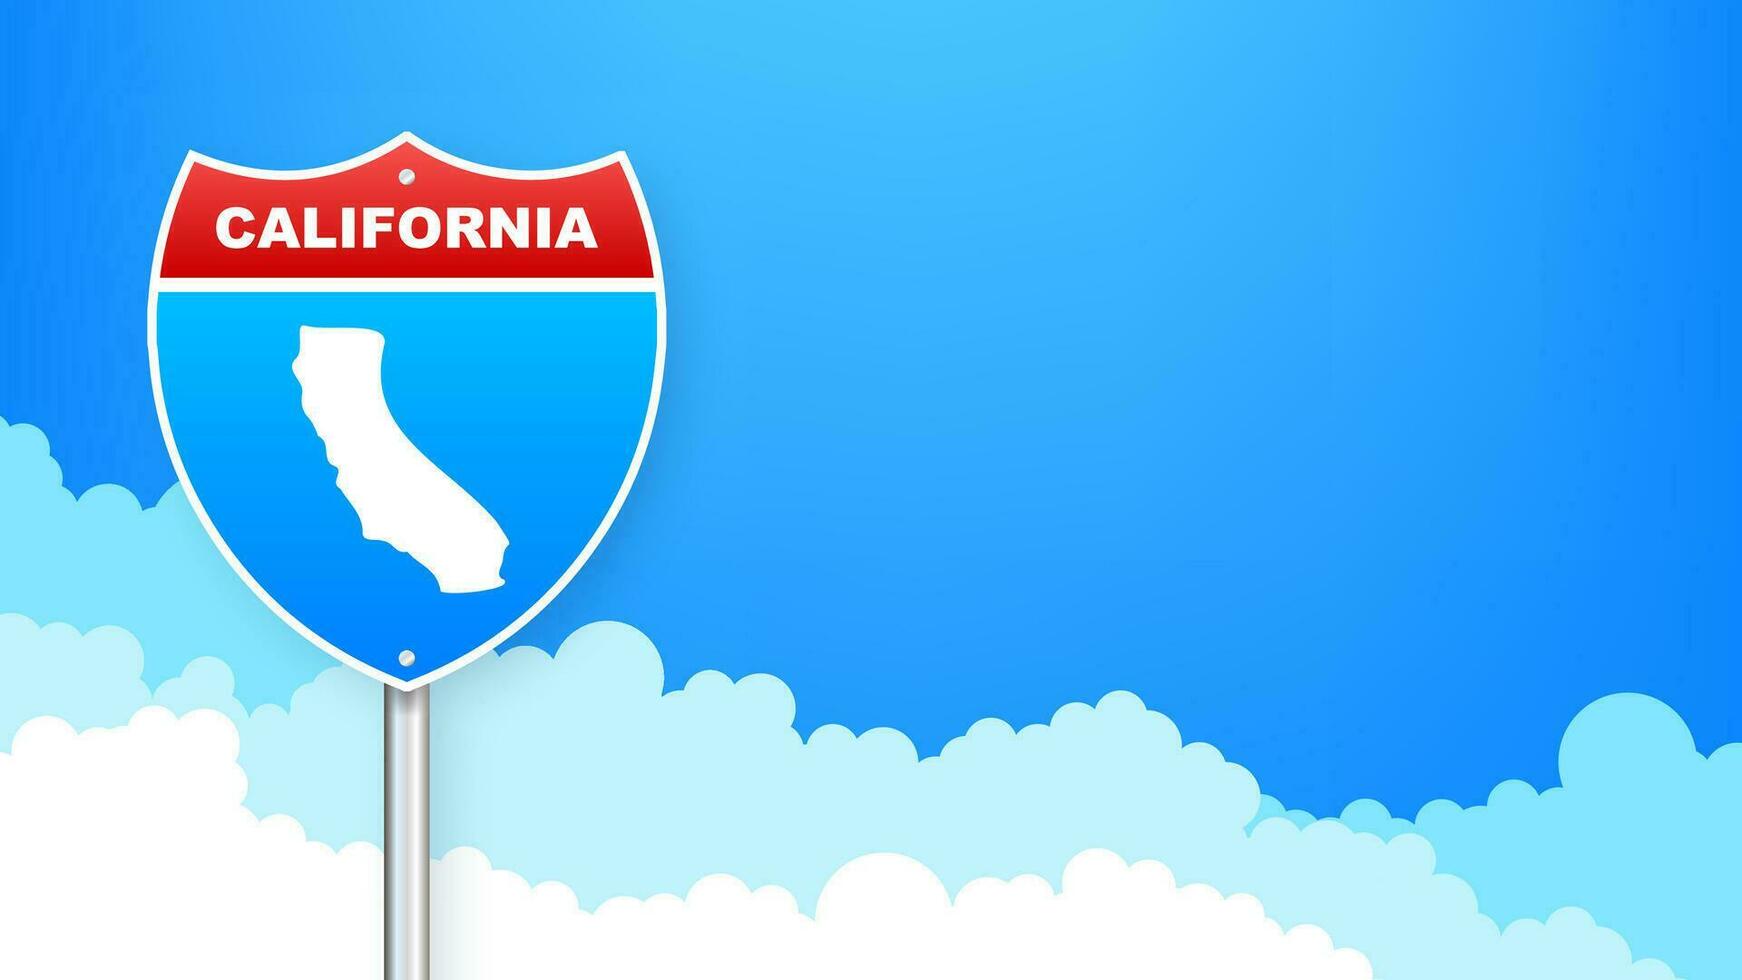 Line map showing the state of California from the united state of america. Road sign. Vector illustration